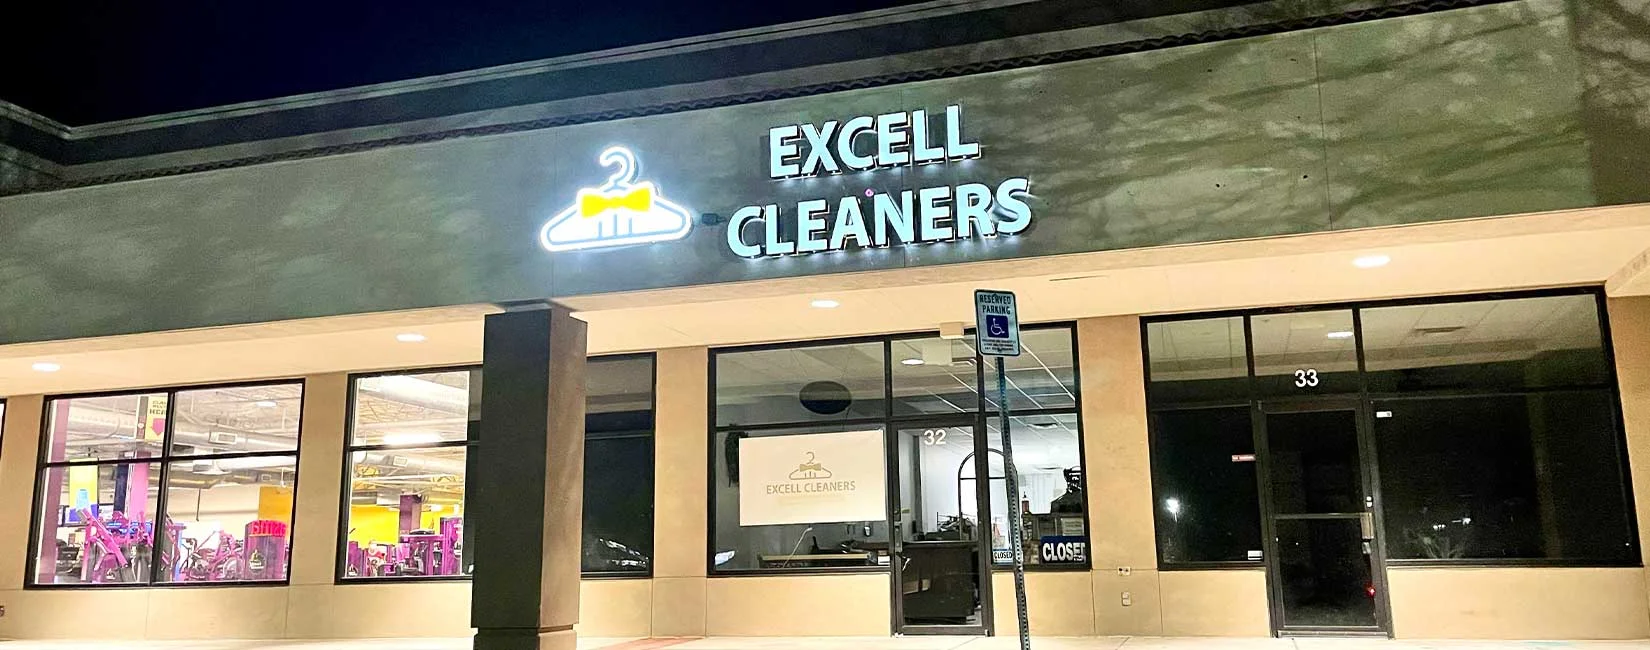 Excell Dry Cleaners